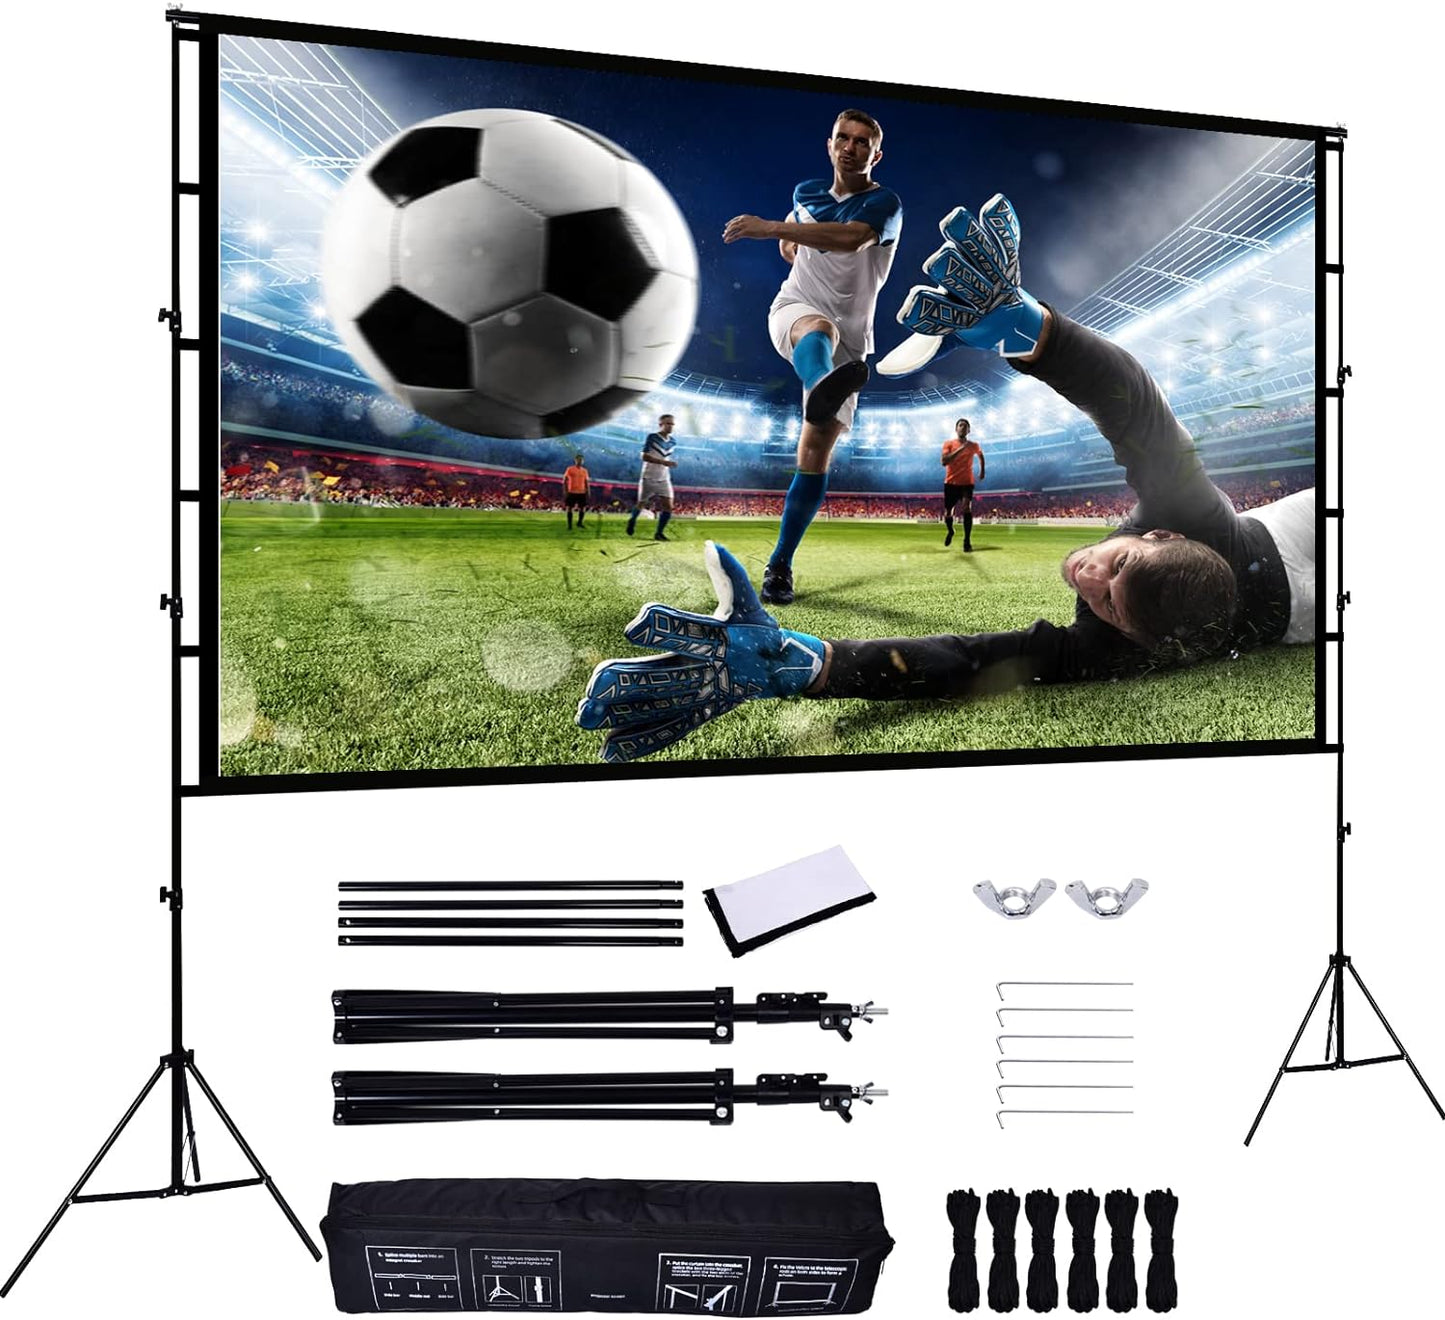 Large 120 Inch Portable Projector Screen with Stand, Assemblable and Detachable Movie Projection Screen Outdoor & Indoor